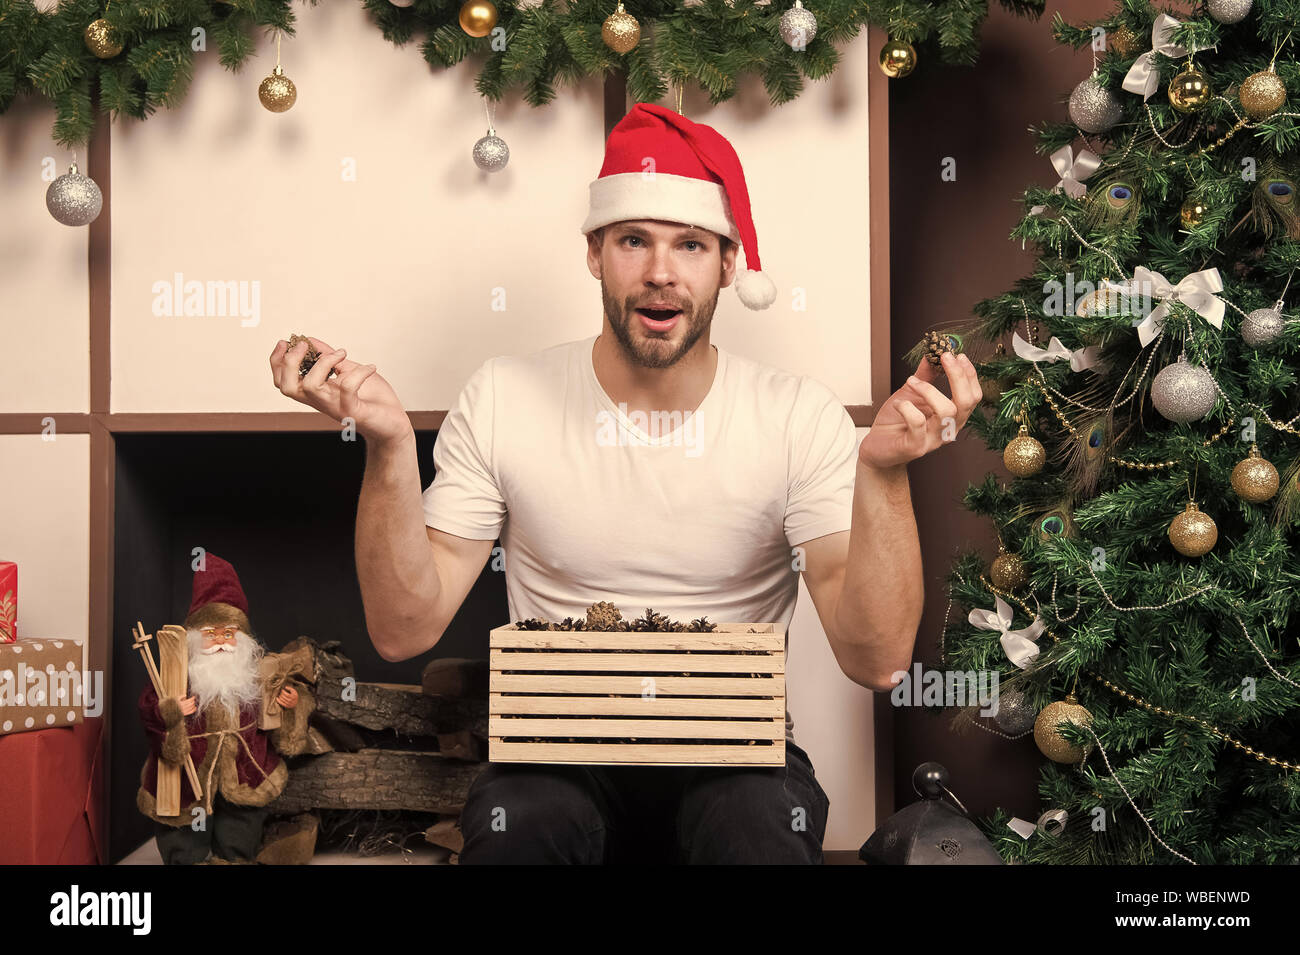 The morning before Xmas. delivery christmas gifts. happy santa man. online  christmas shopping. New year scene with tree & gift. man in santa hat hold  christmas present. Merry Christmas. what is this